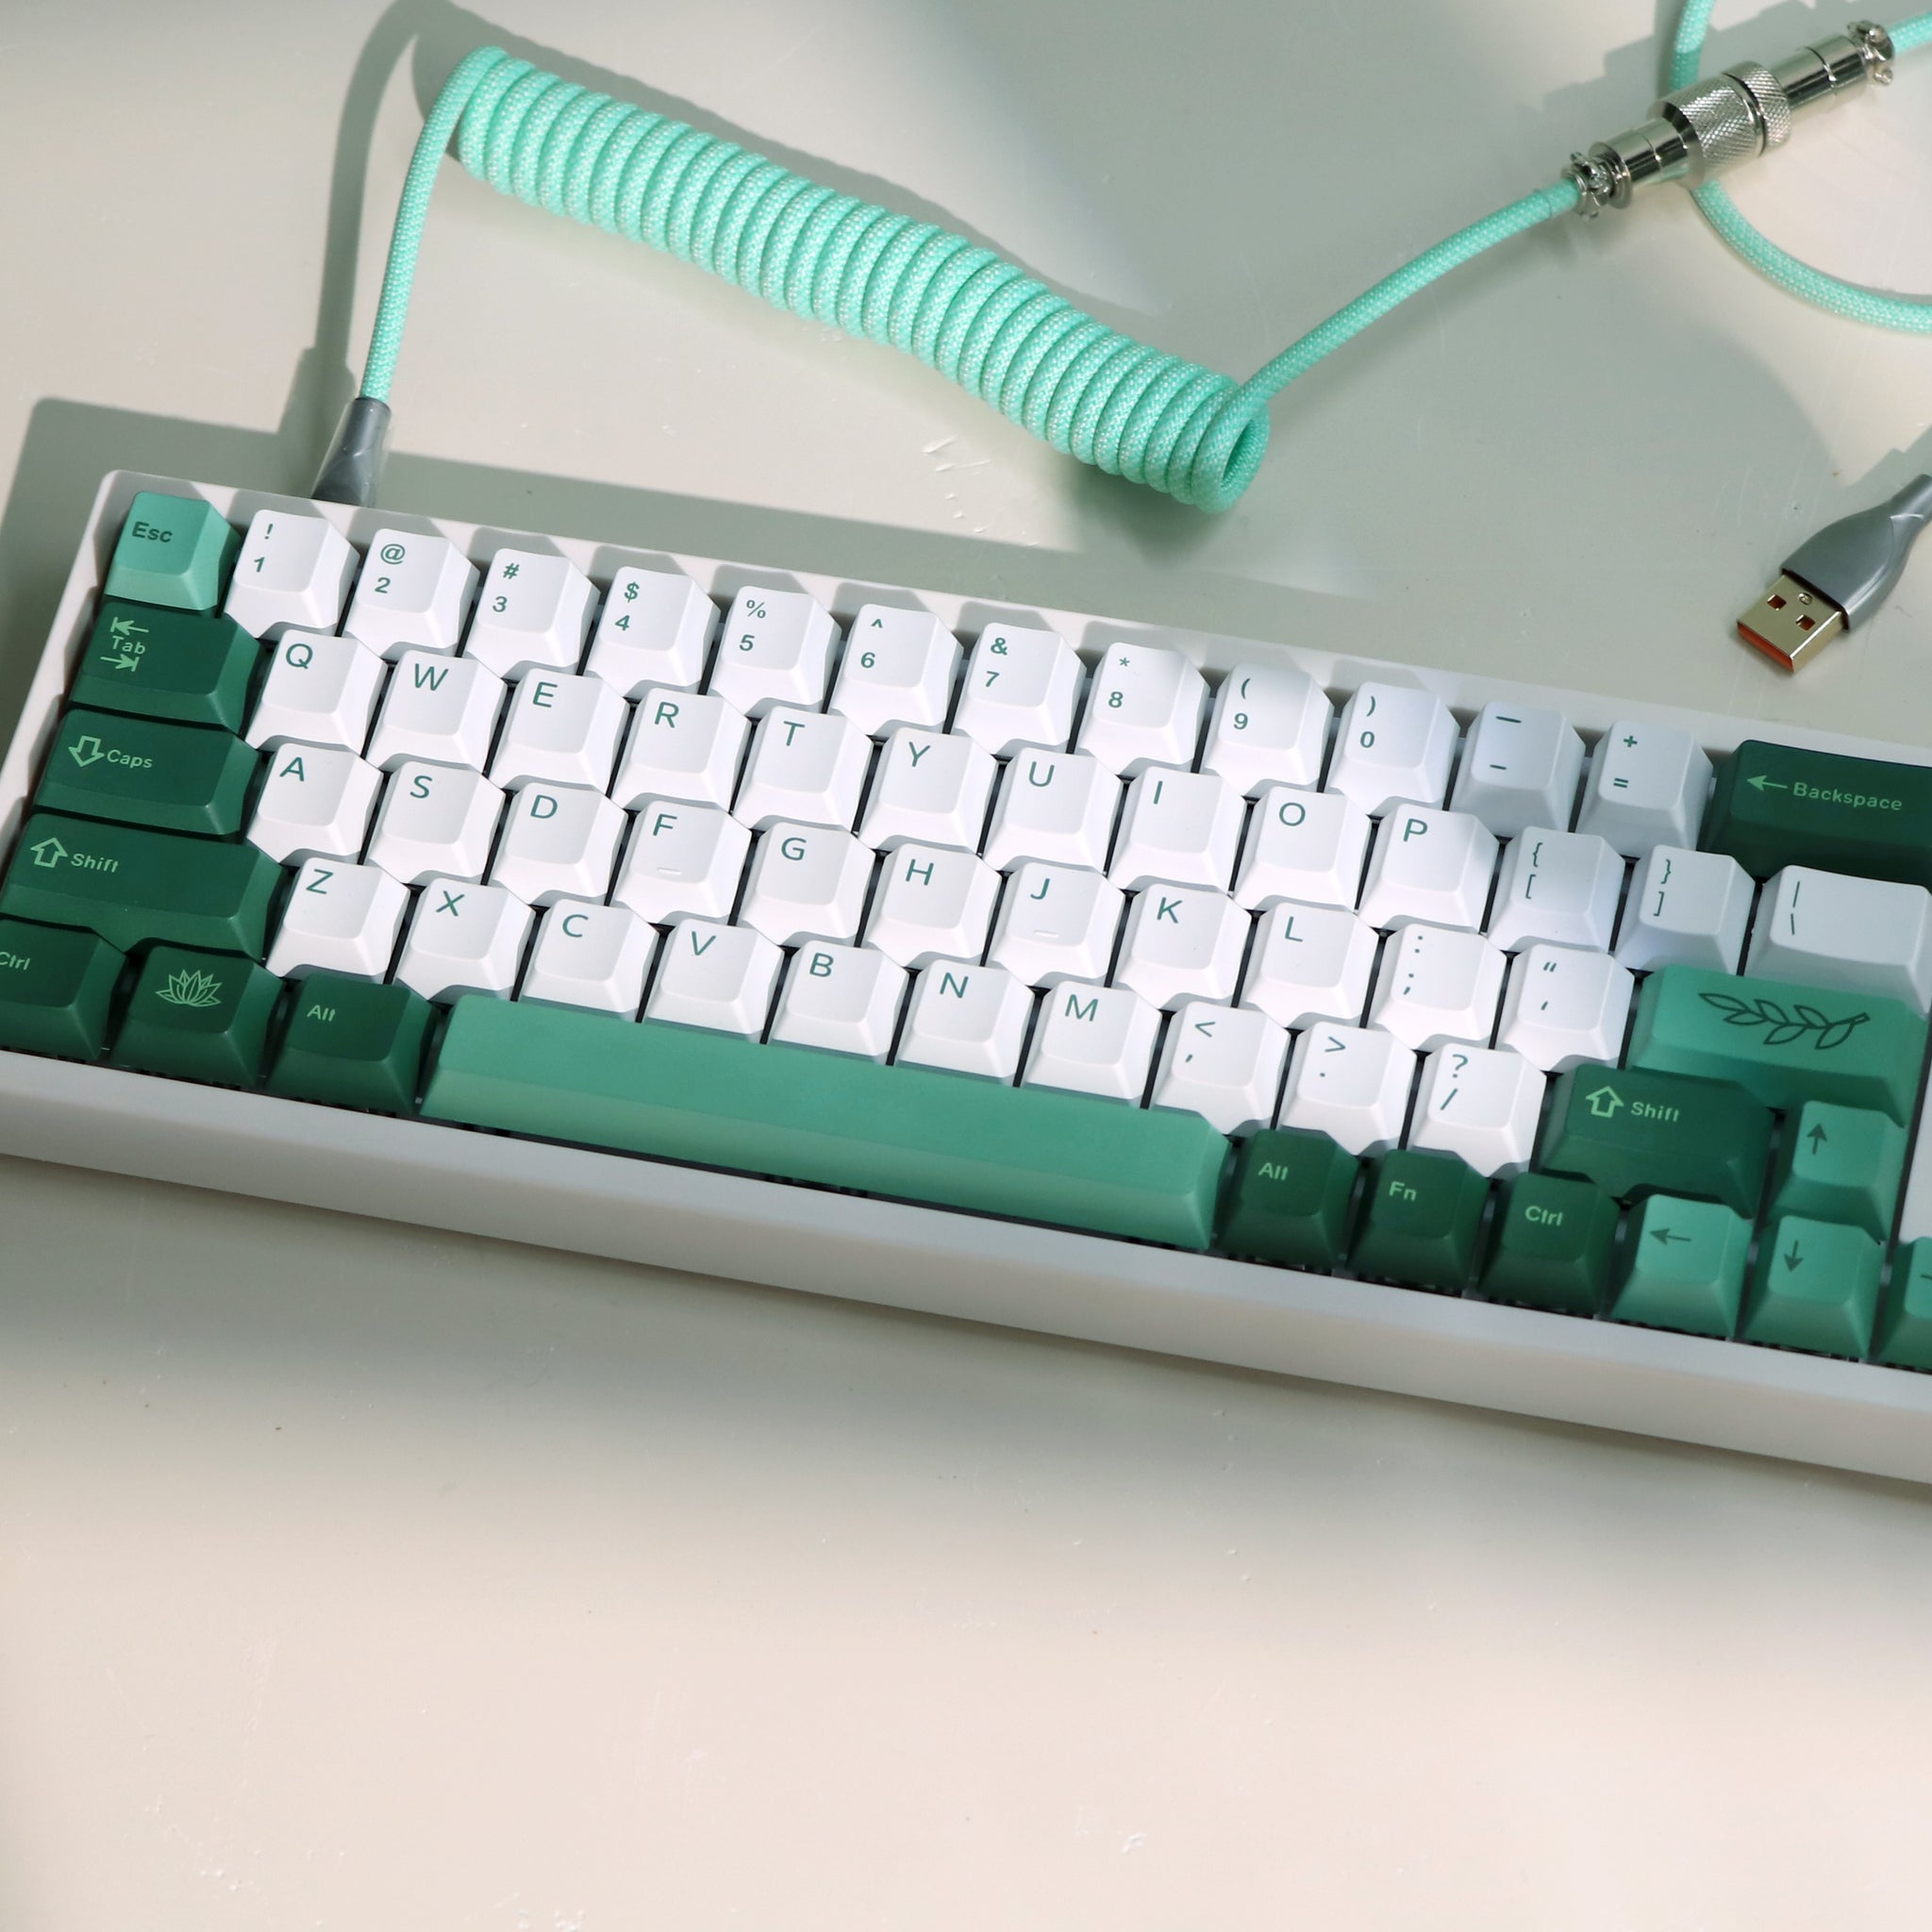 The Ultimate Guide for Buying a Mechanical Keyboard